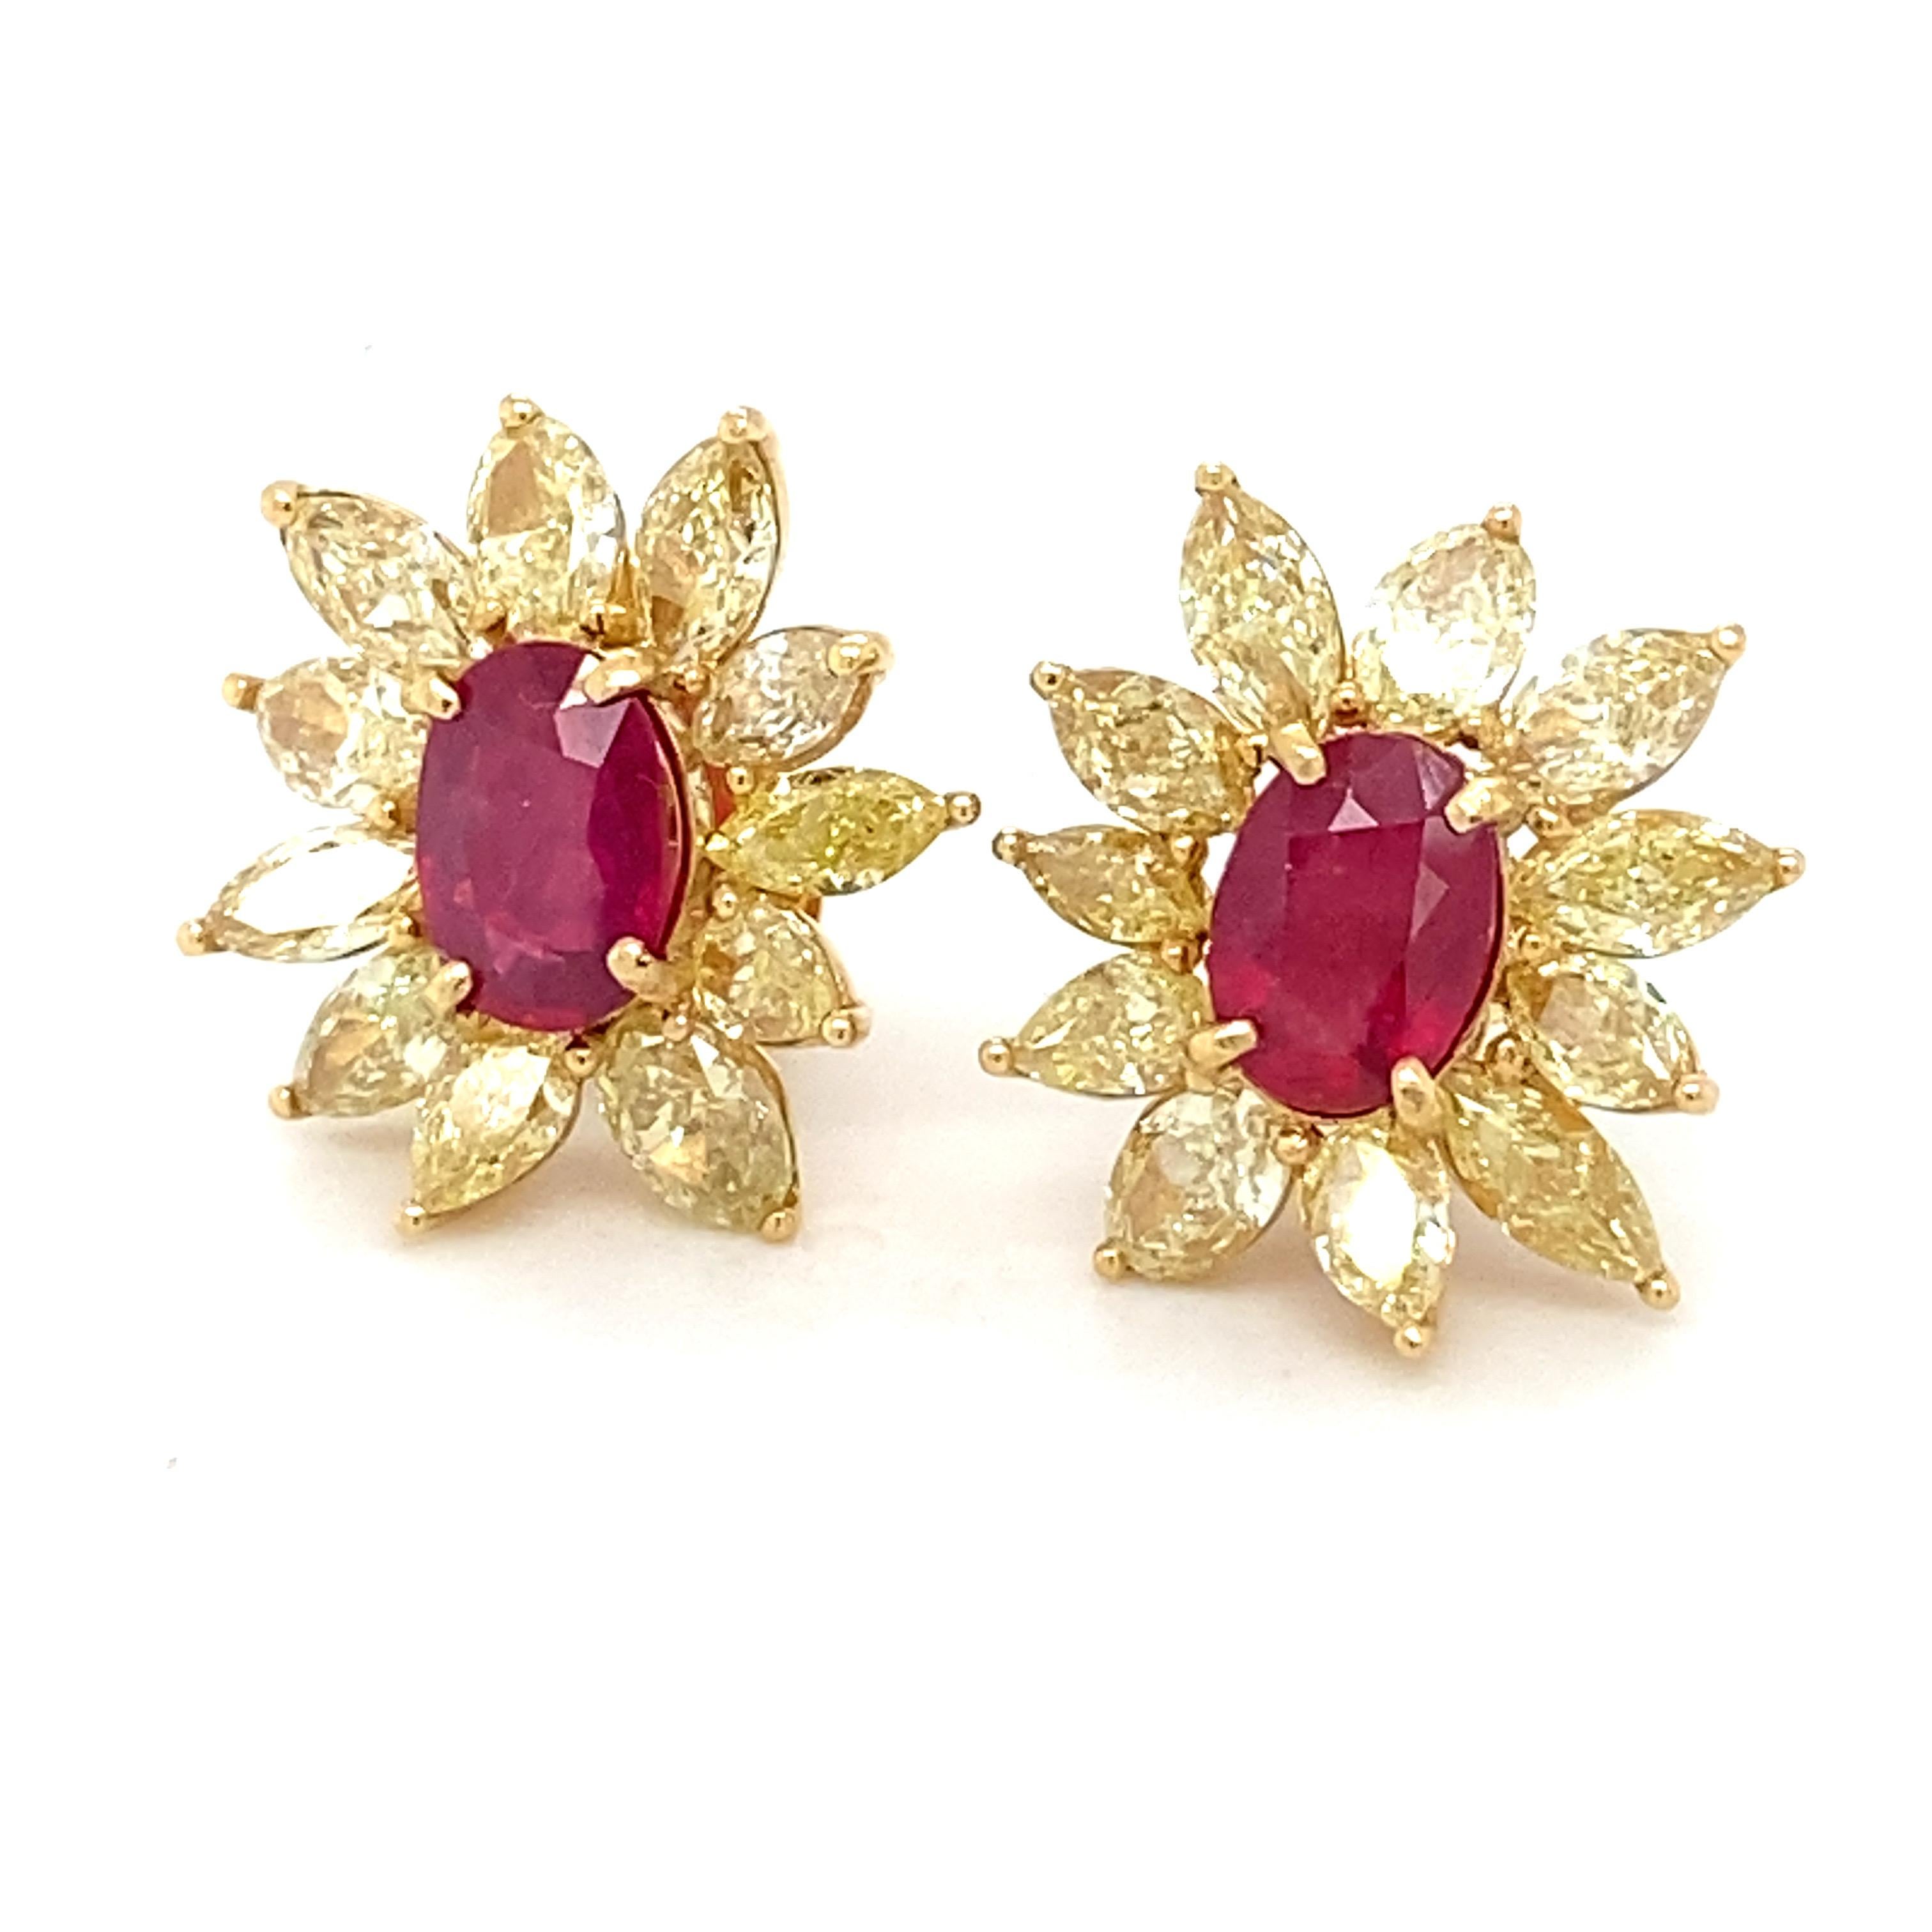 This meticulously crafted Marquise Yellow Diamond embodies a striking contrast with rubies in the center. Crafted in yellow gold with prong settings.
Yellow Diamond: 6.76 carat
Ruby: 4.17 carat
Yellow Gold; 18K